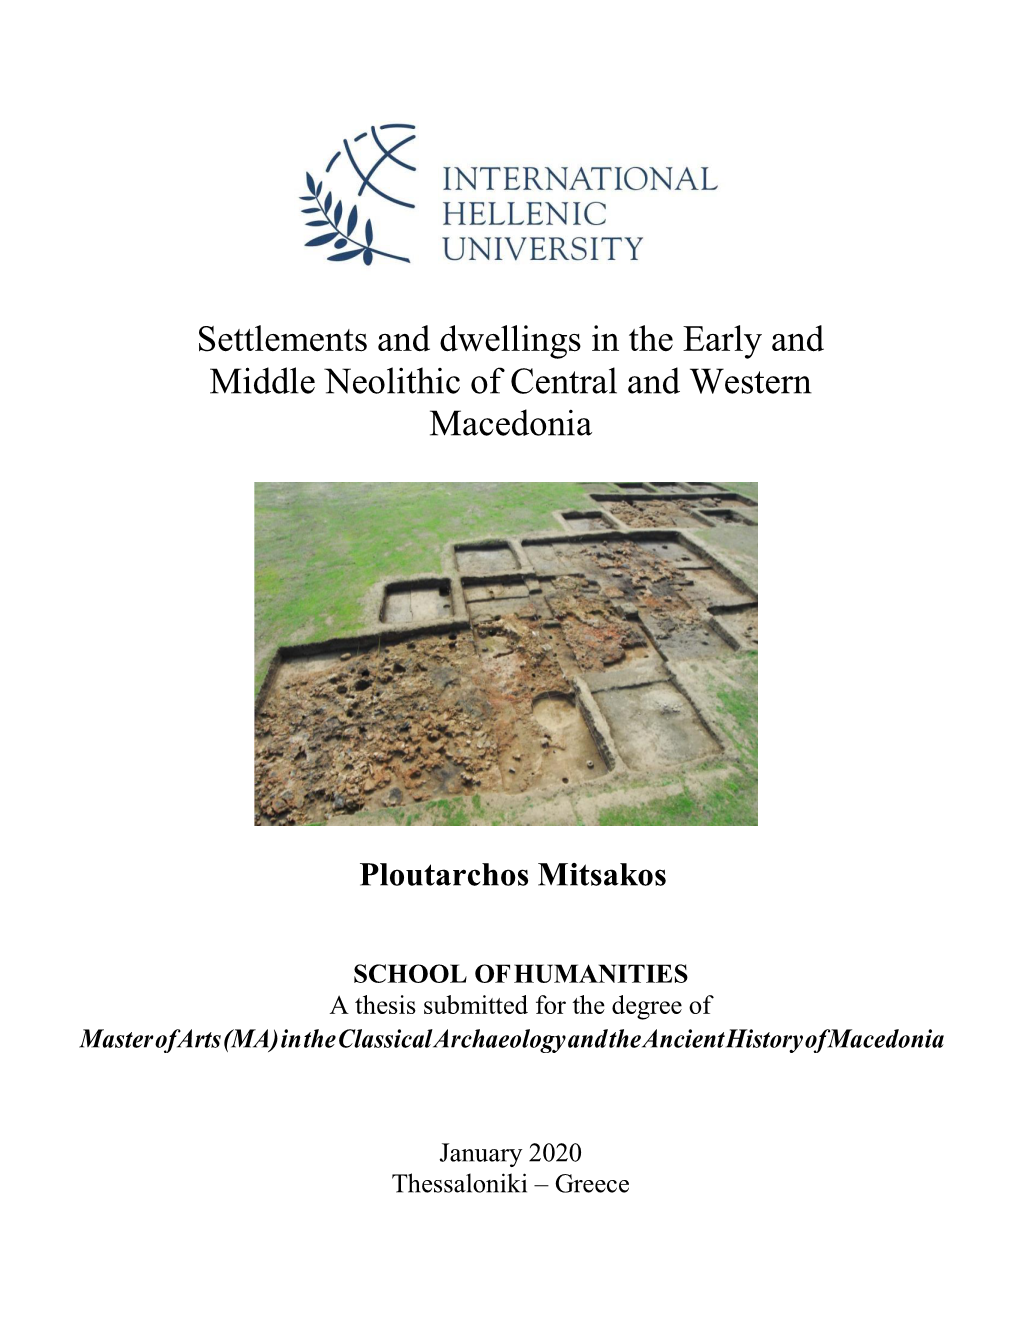 Settlements and Dwellings in the Early and Middle Neolithic of Central and Western Macedonia